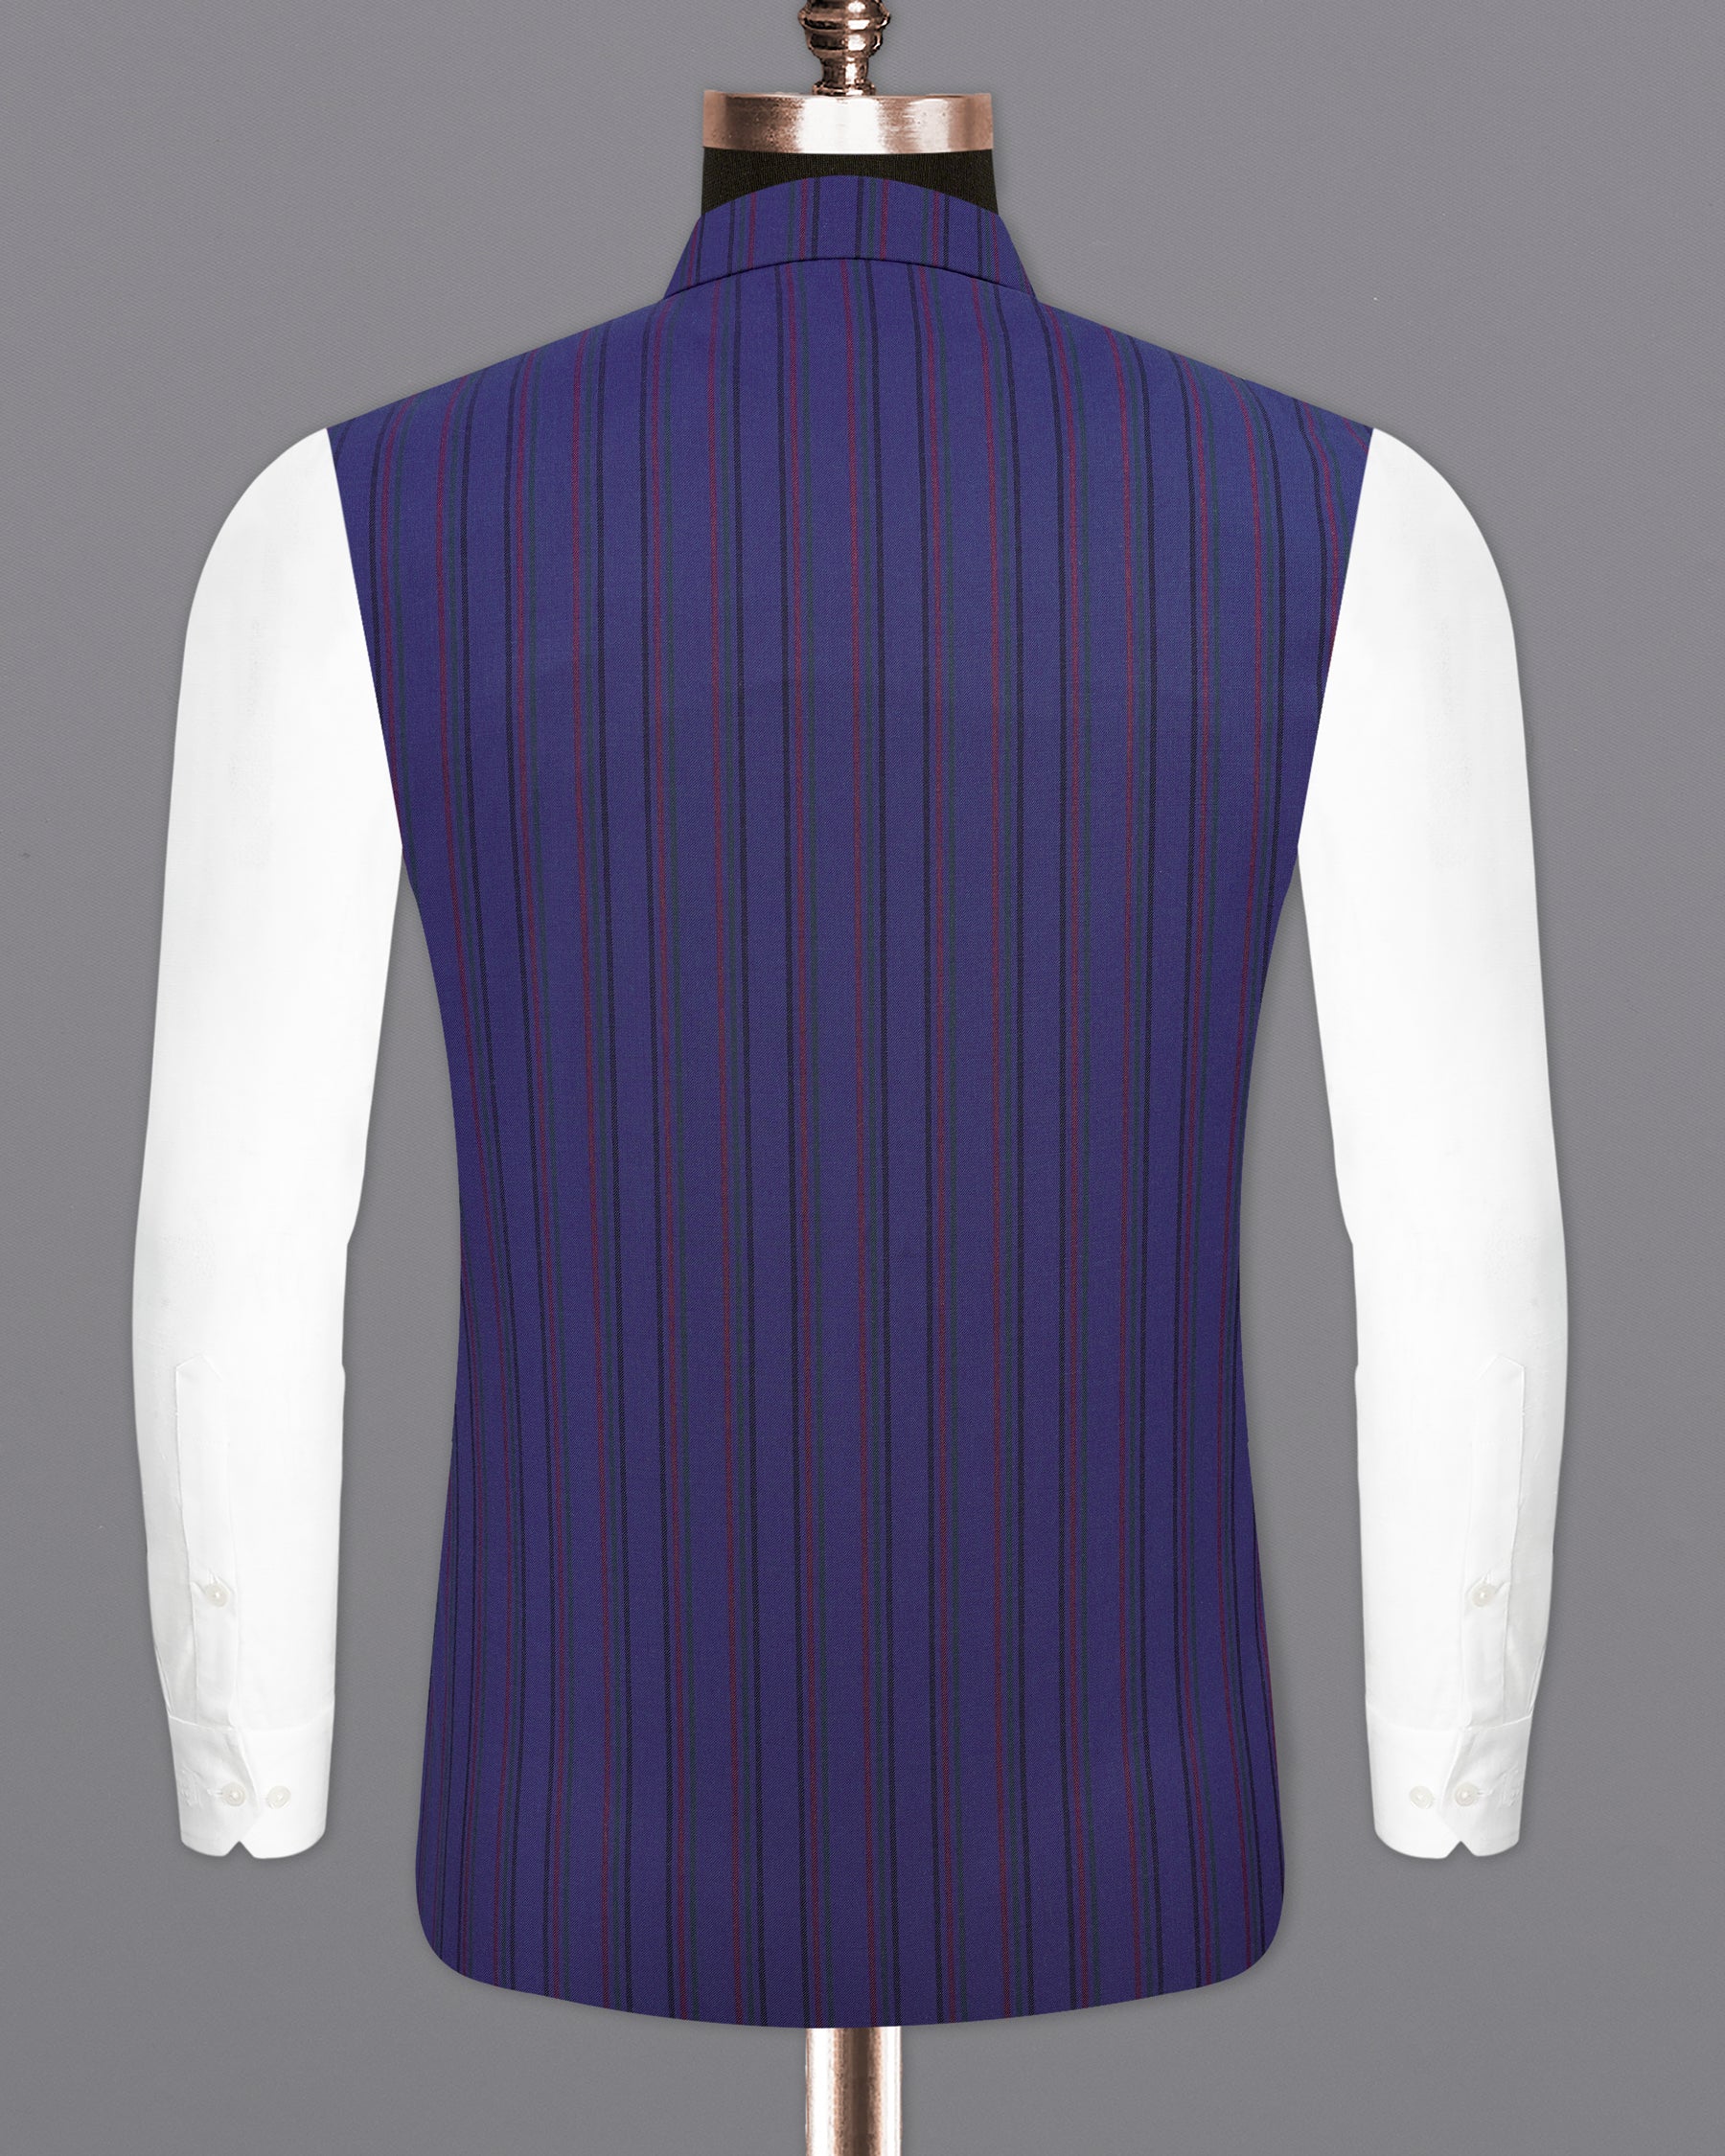 Violent Navy Blue Multicolour Striped Cross Buttoned Bandhgala Nehru Jacket  WC2152-38, WC2152-39, WC2152-40, WC2152-42, WC2152-44, WC2152-46, WC2152-48, WC2152-50, WC2152-52